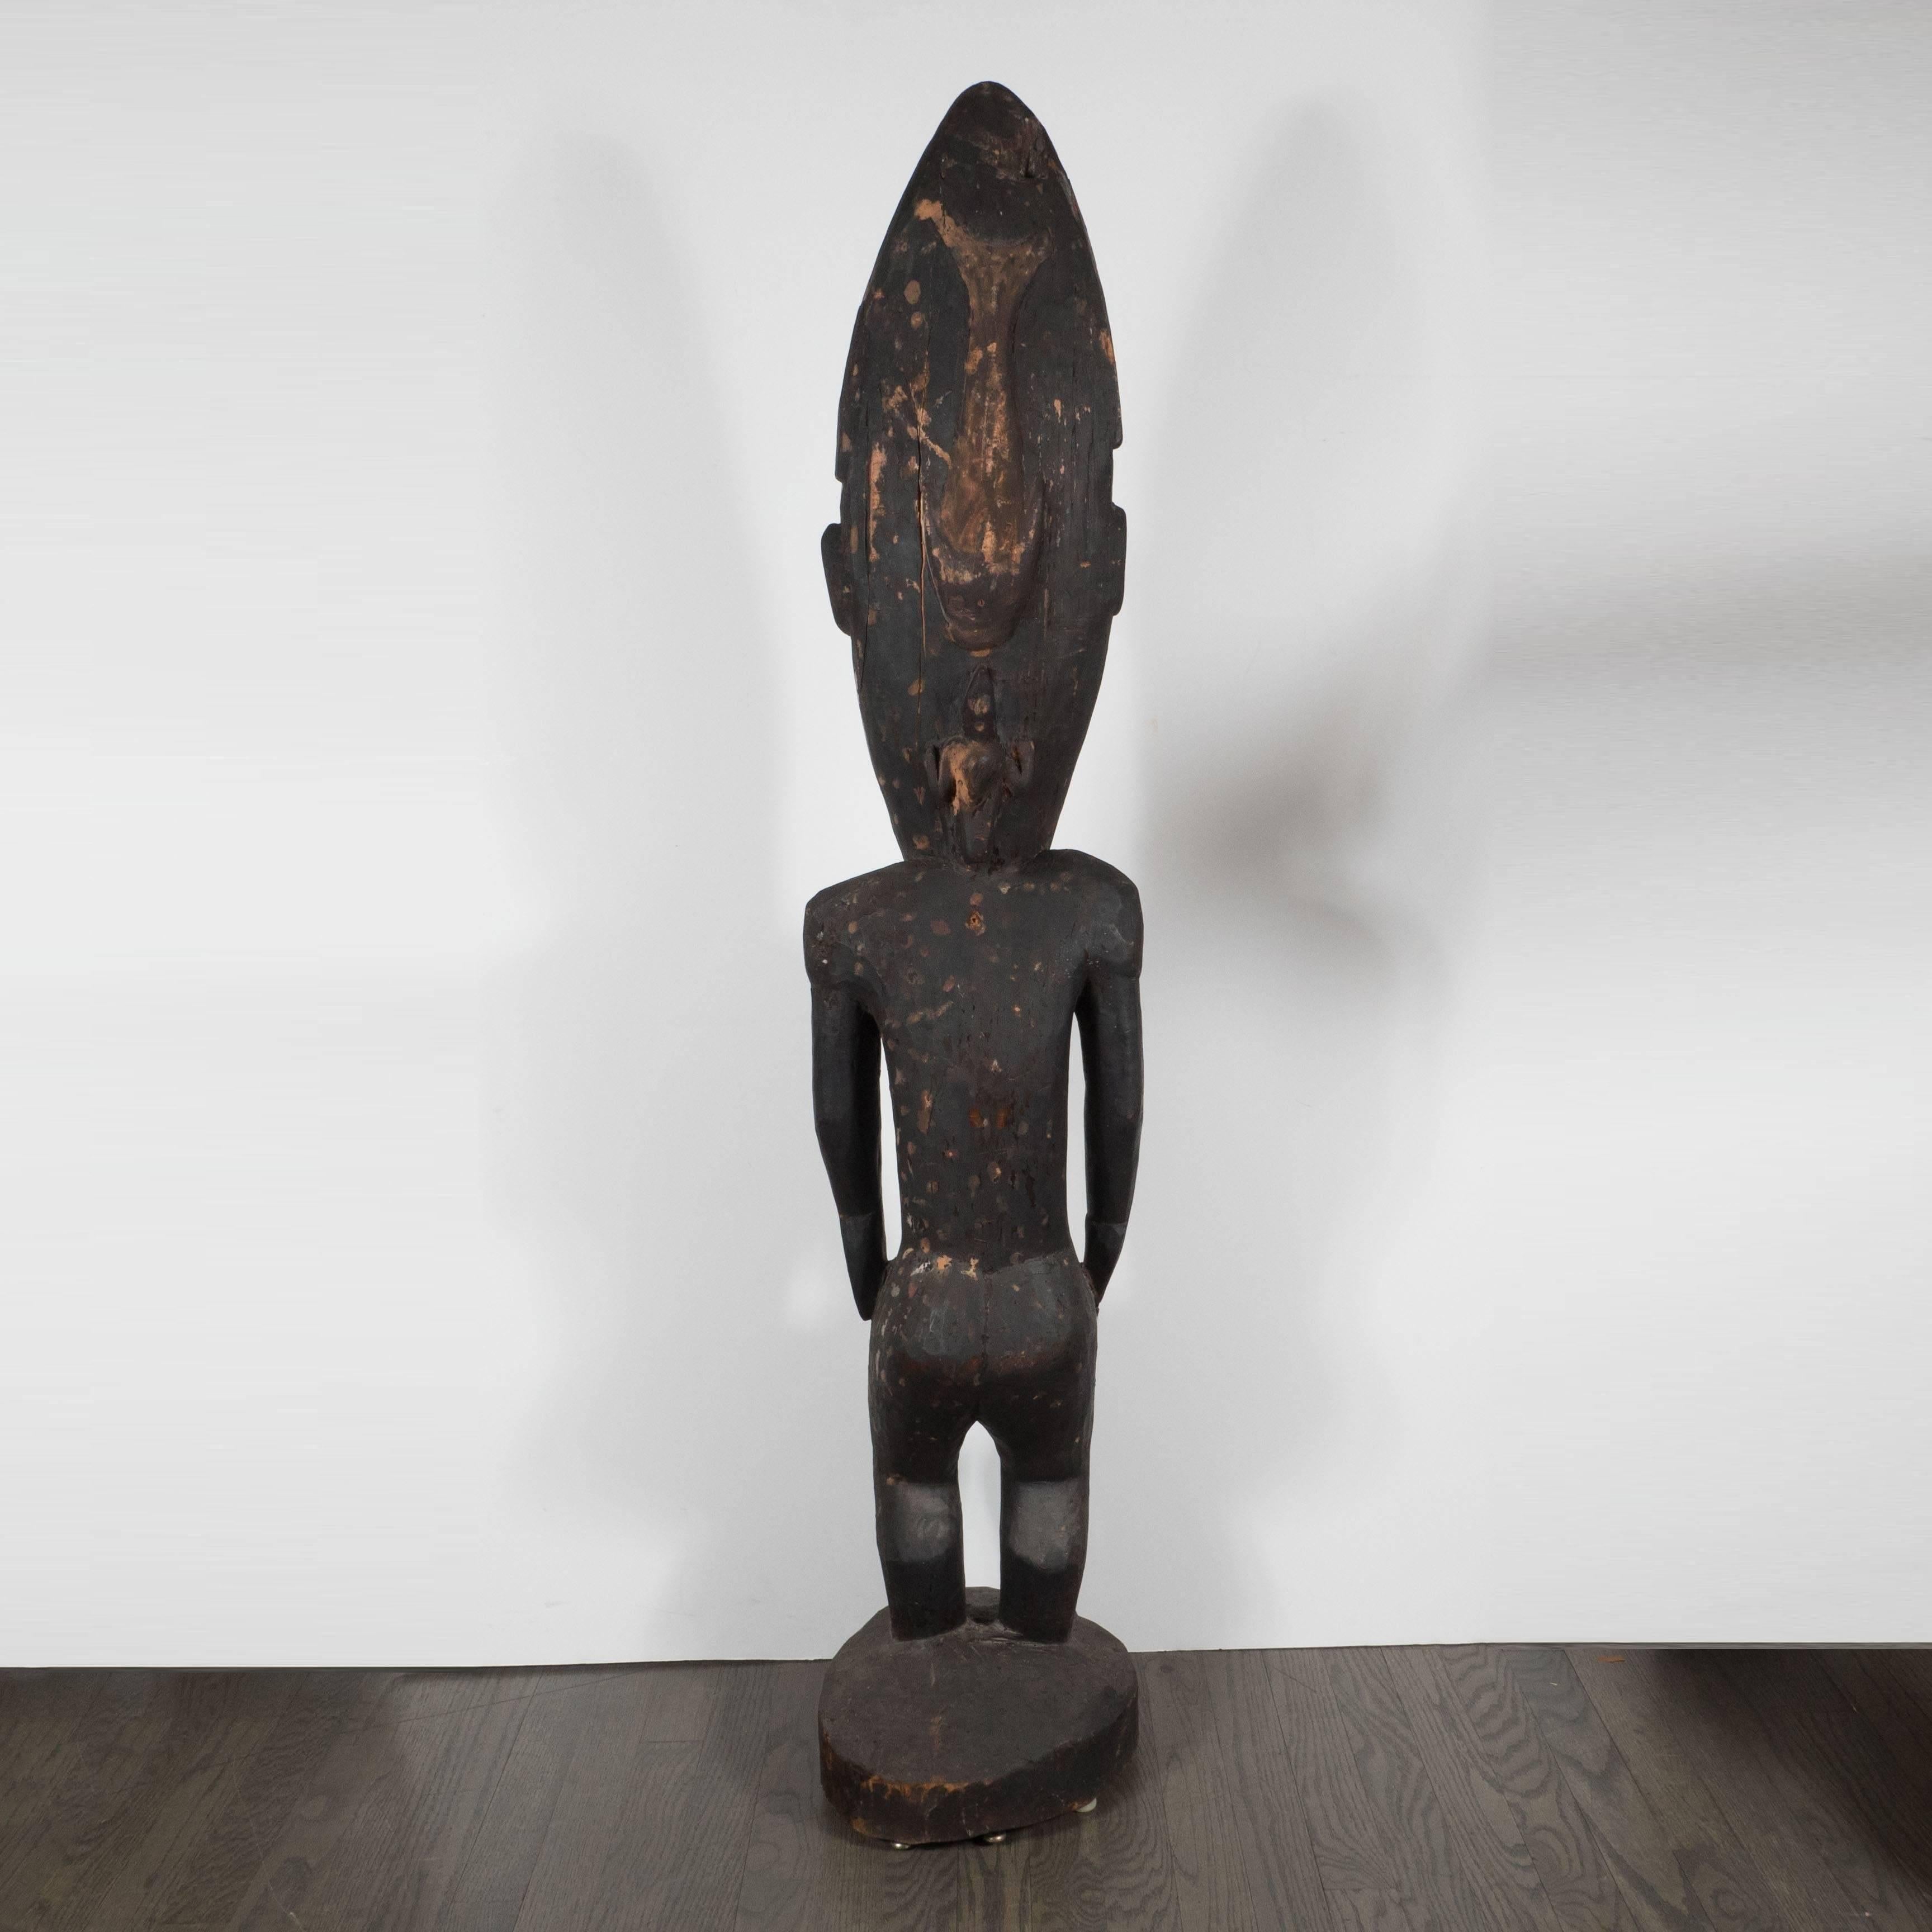 Realized in Papua New Guinea towards the end of the 19th Century, this is a striking example of tribal sculptures from the region. The oversized ovoid head has inset circular eyes rendered in white pigment. Traces of organic pigment have been